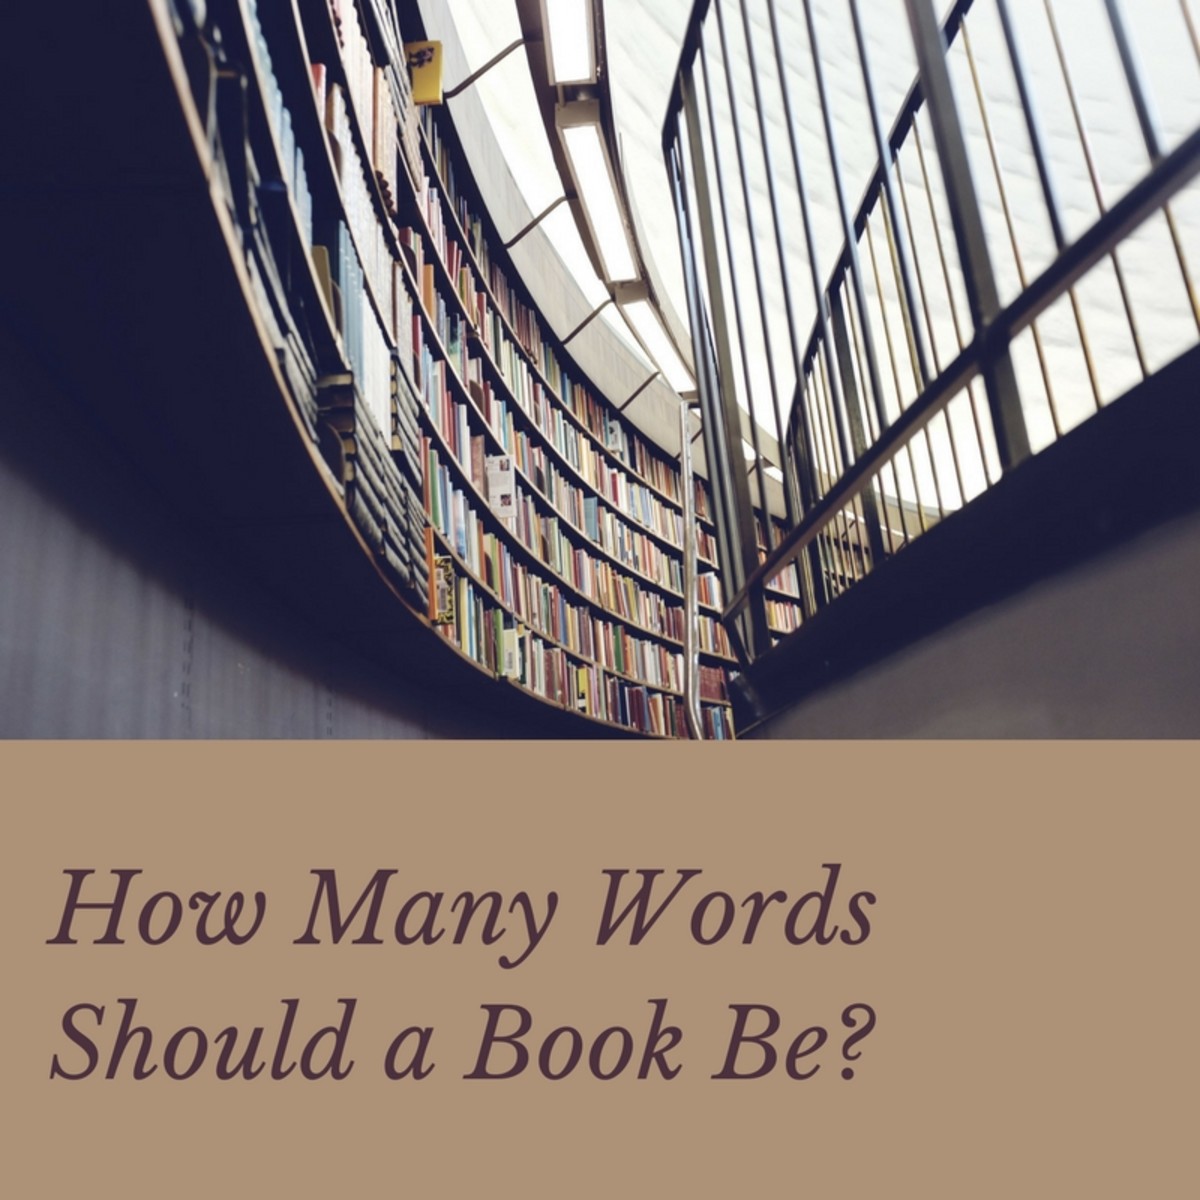 How Many Words Should a Book Be?